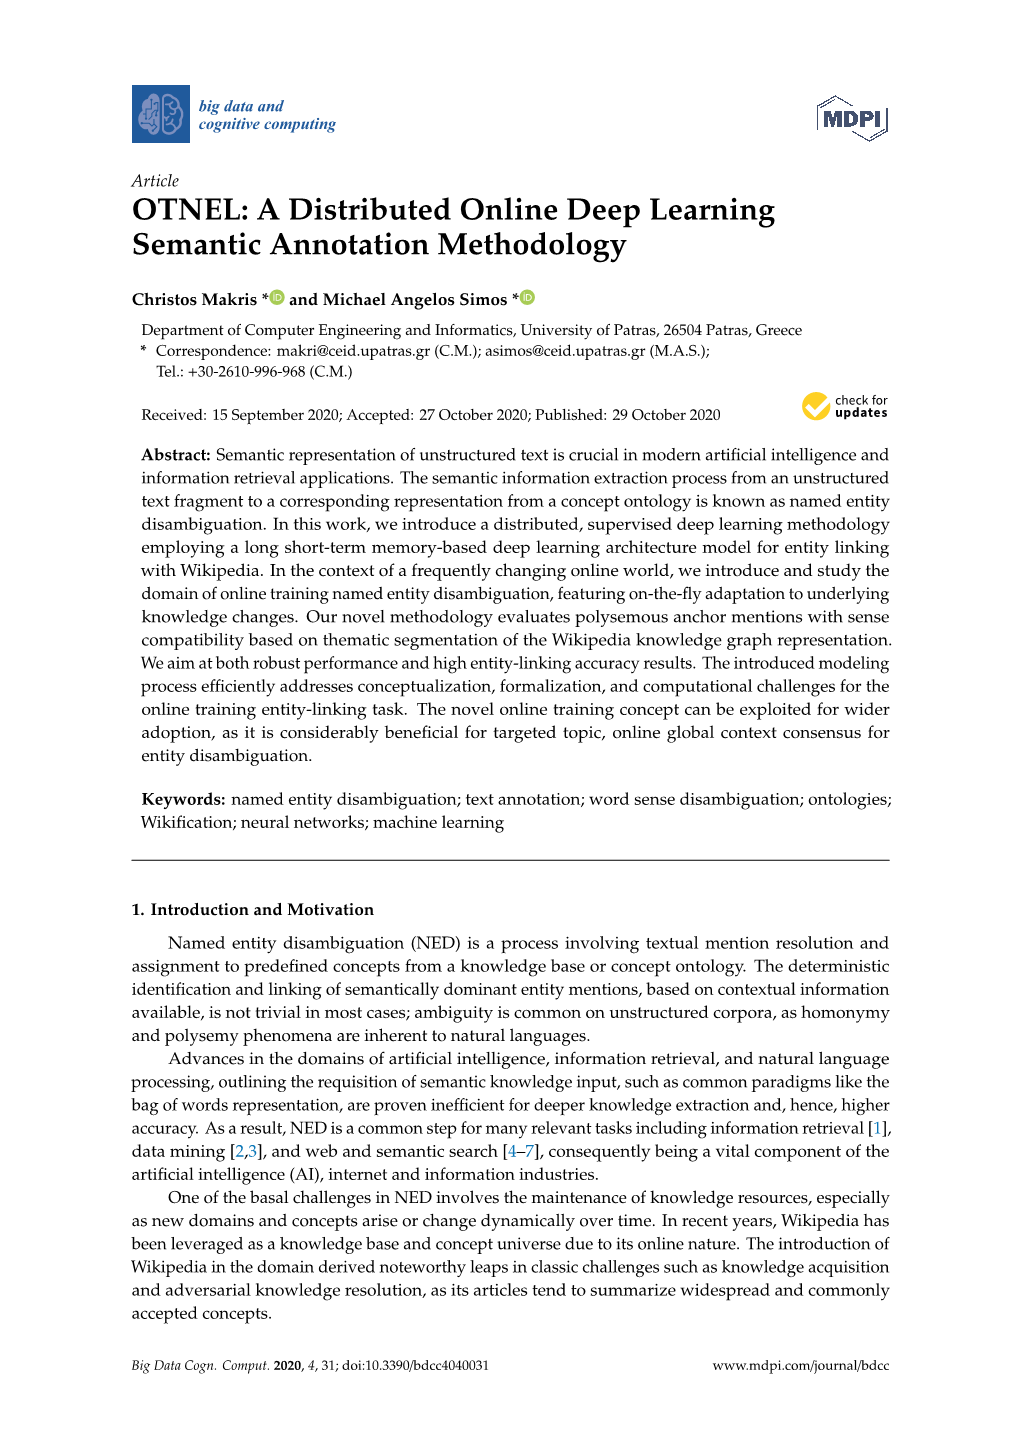 A Distributed Online Deep Learning Semantic Annotation Methodology